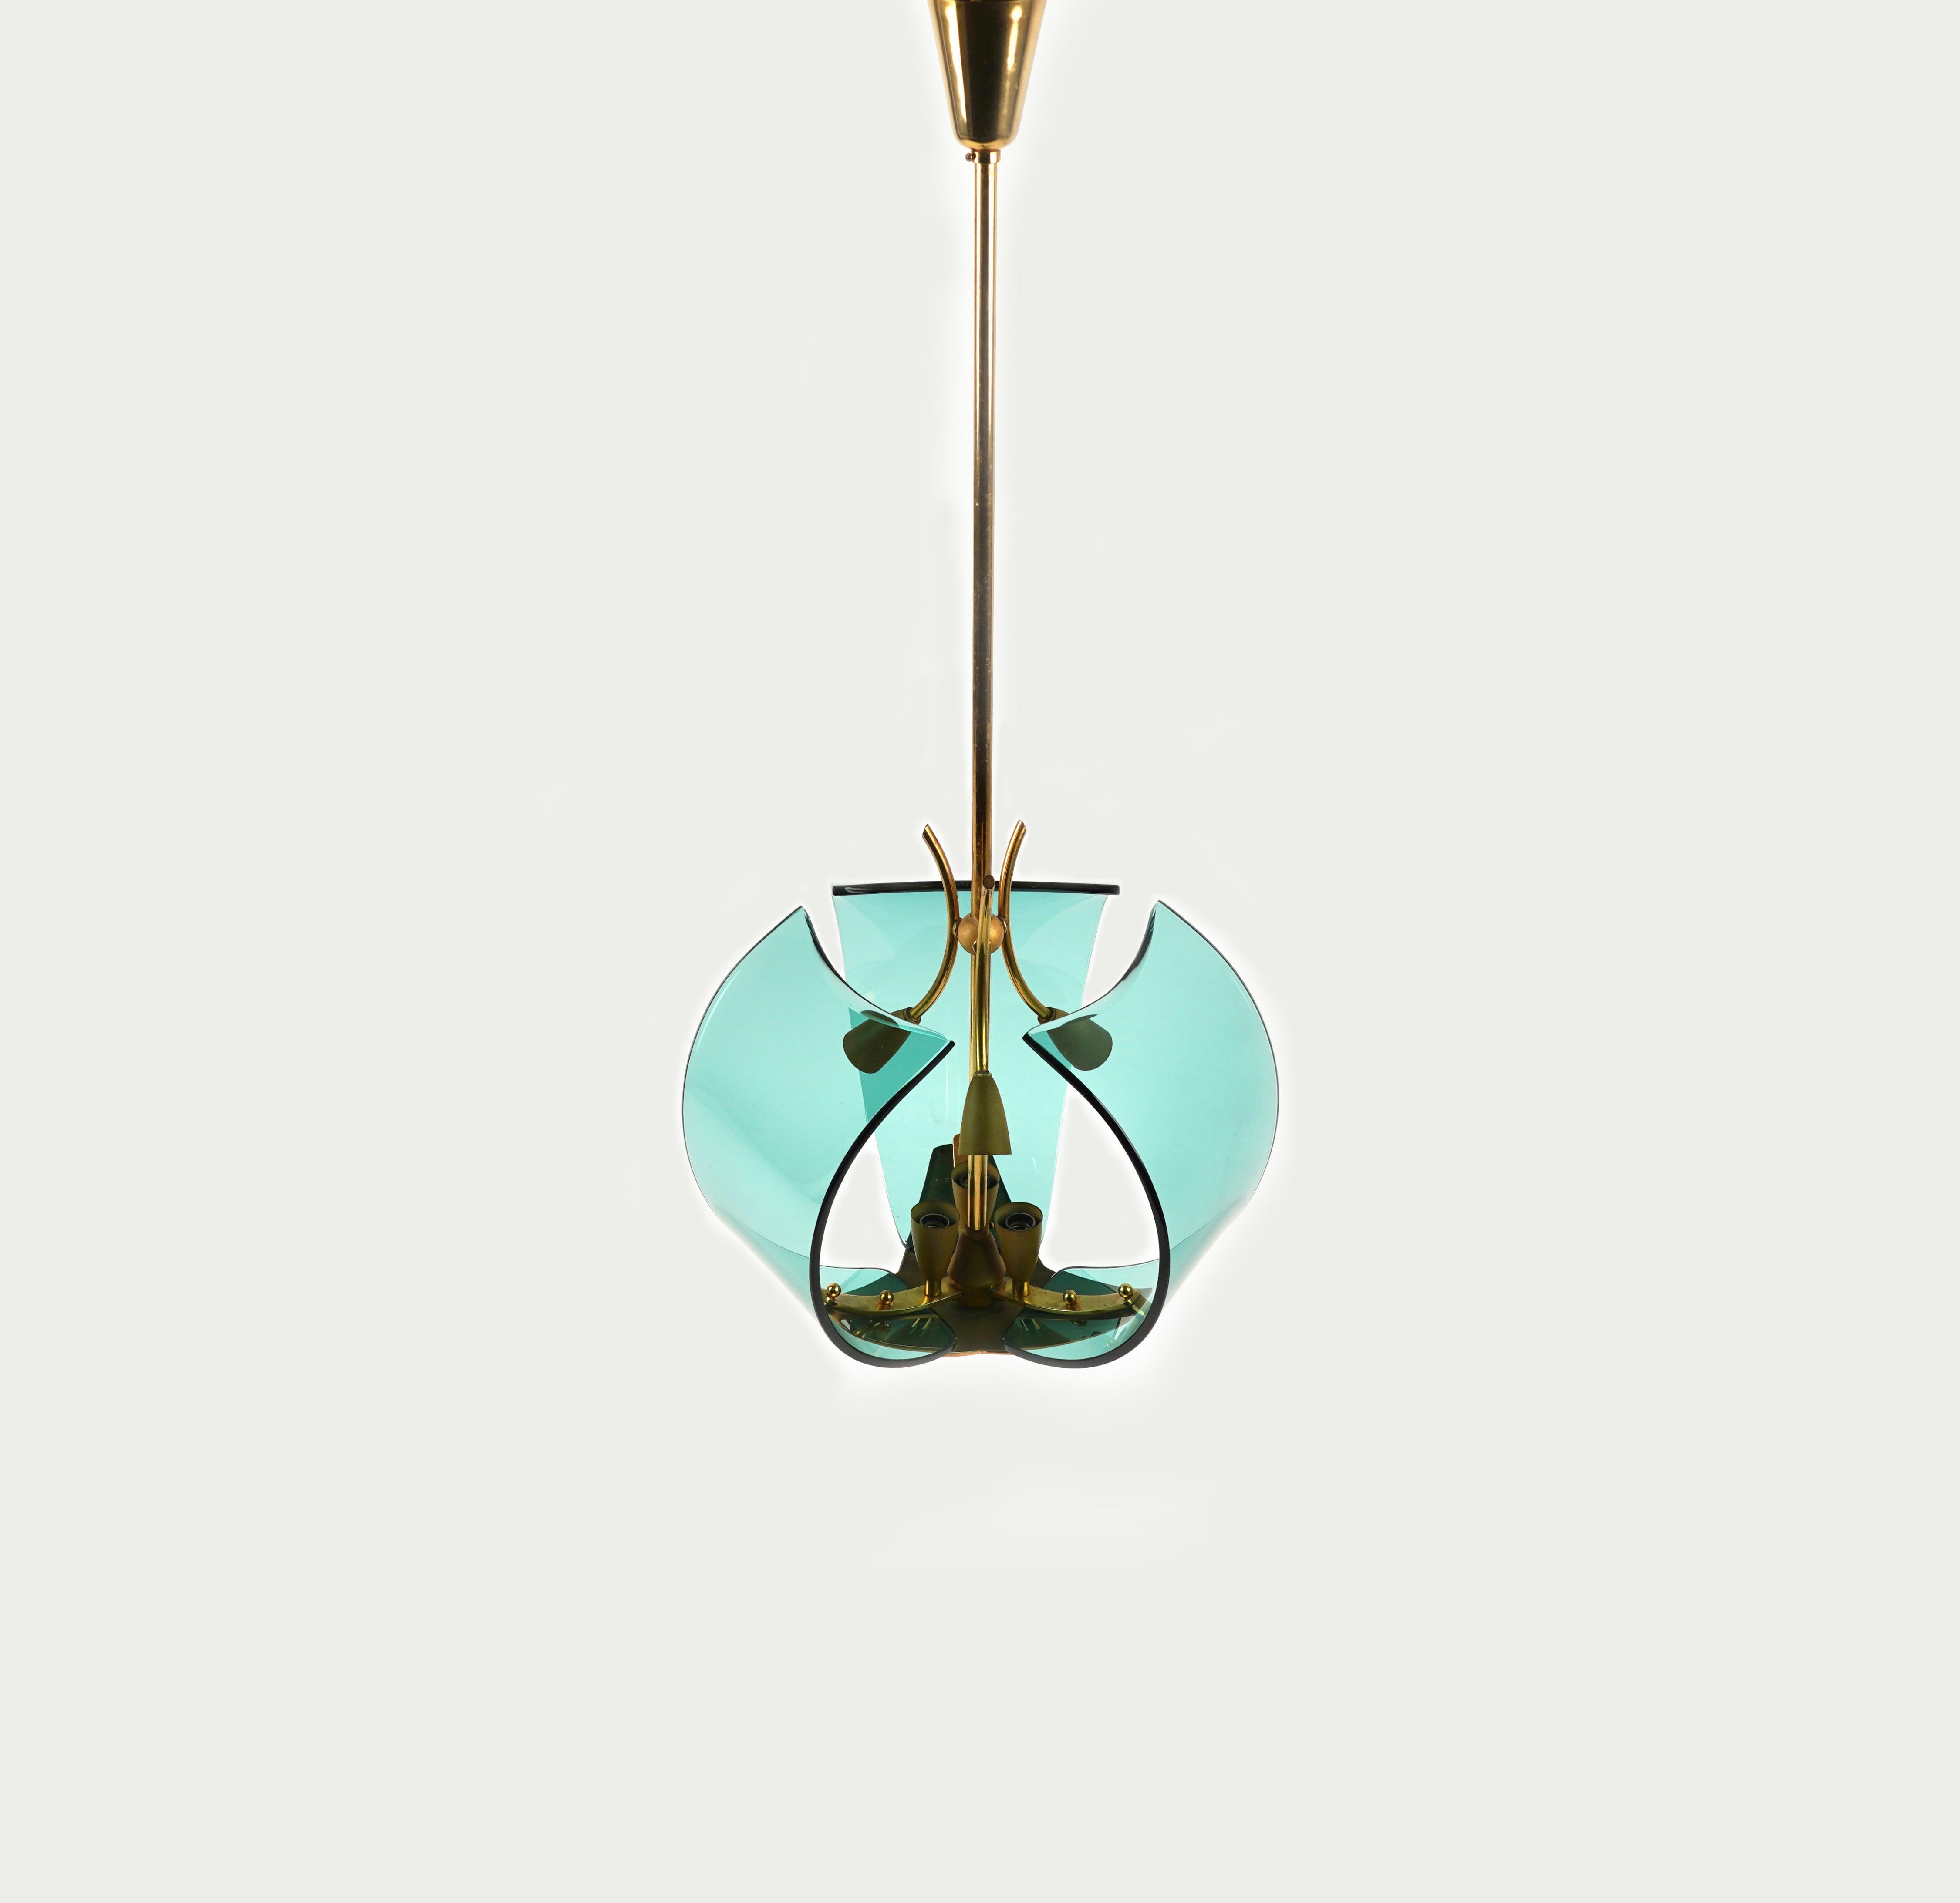 Midcentury amazing chandelier in brass and glass with fittings for six lights, suspended from a brass rod and conical canopy.

This piece is attributed to Fontana Arte designed by Pietro Chiesa one of the greatest Italian Art Deco